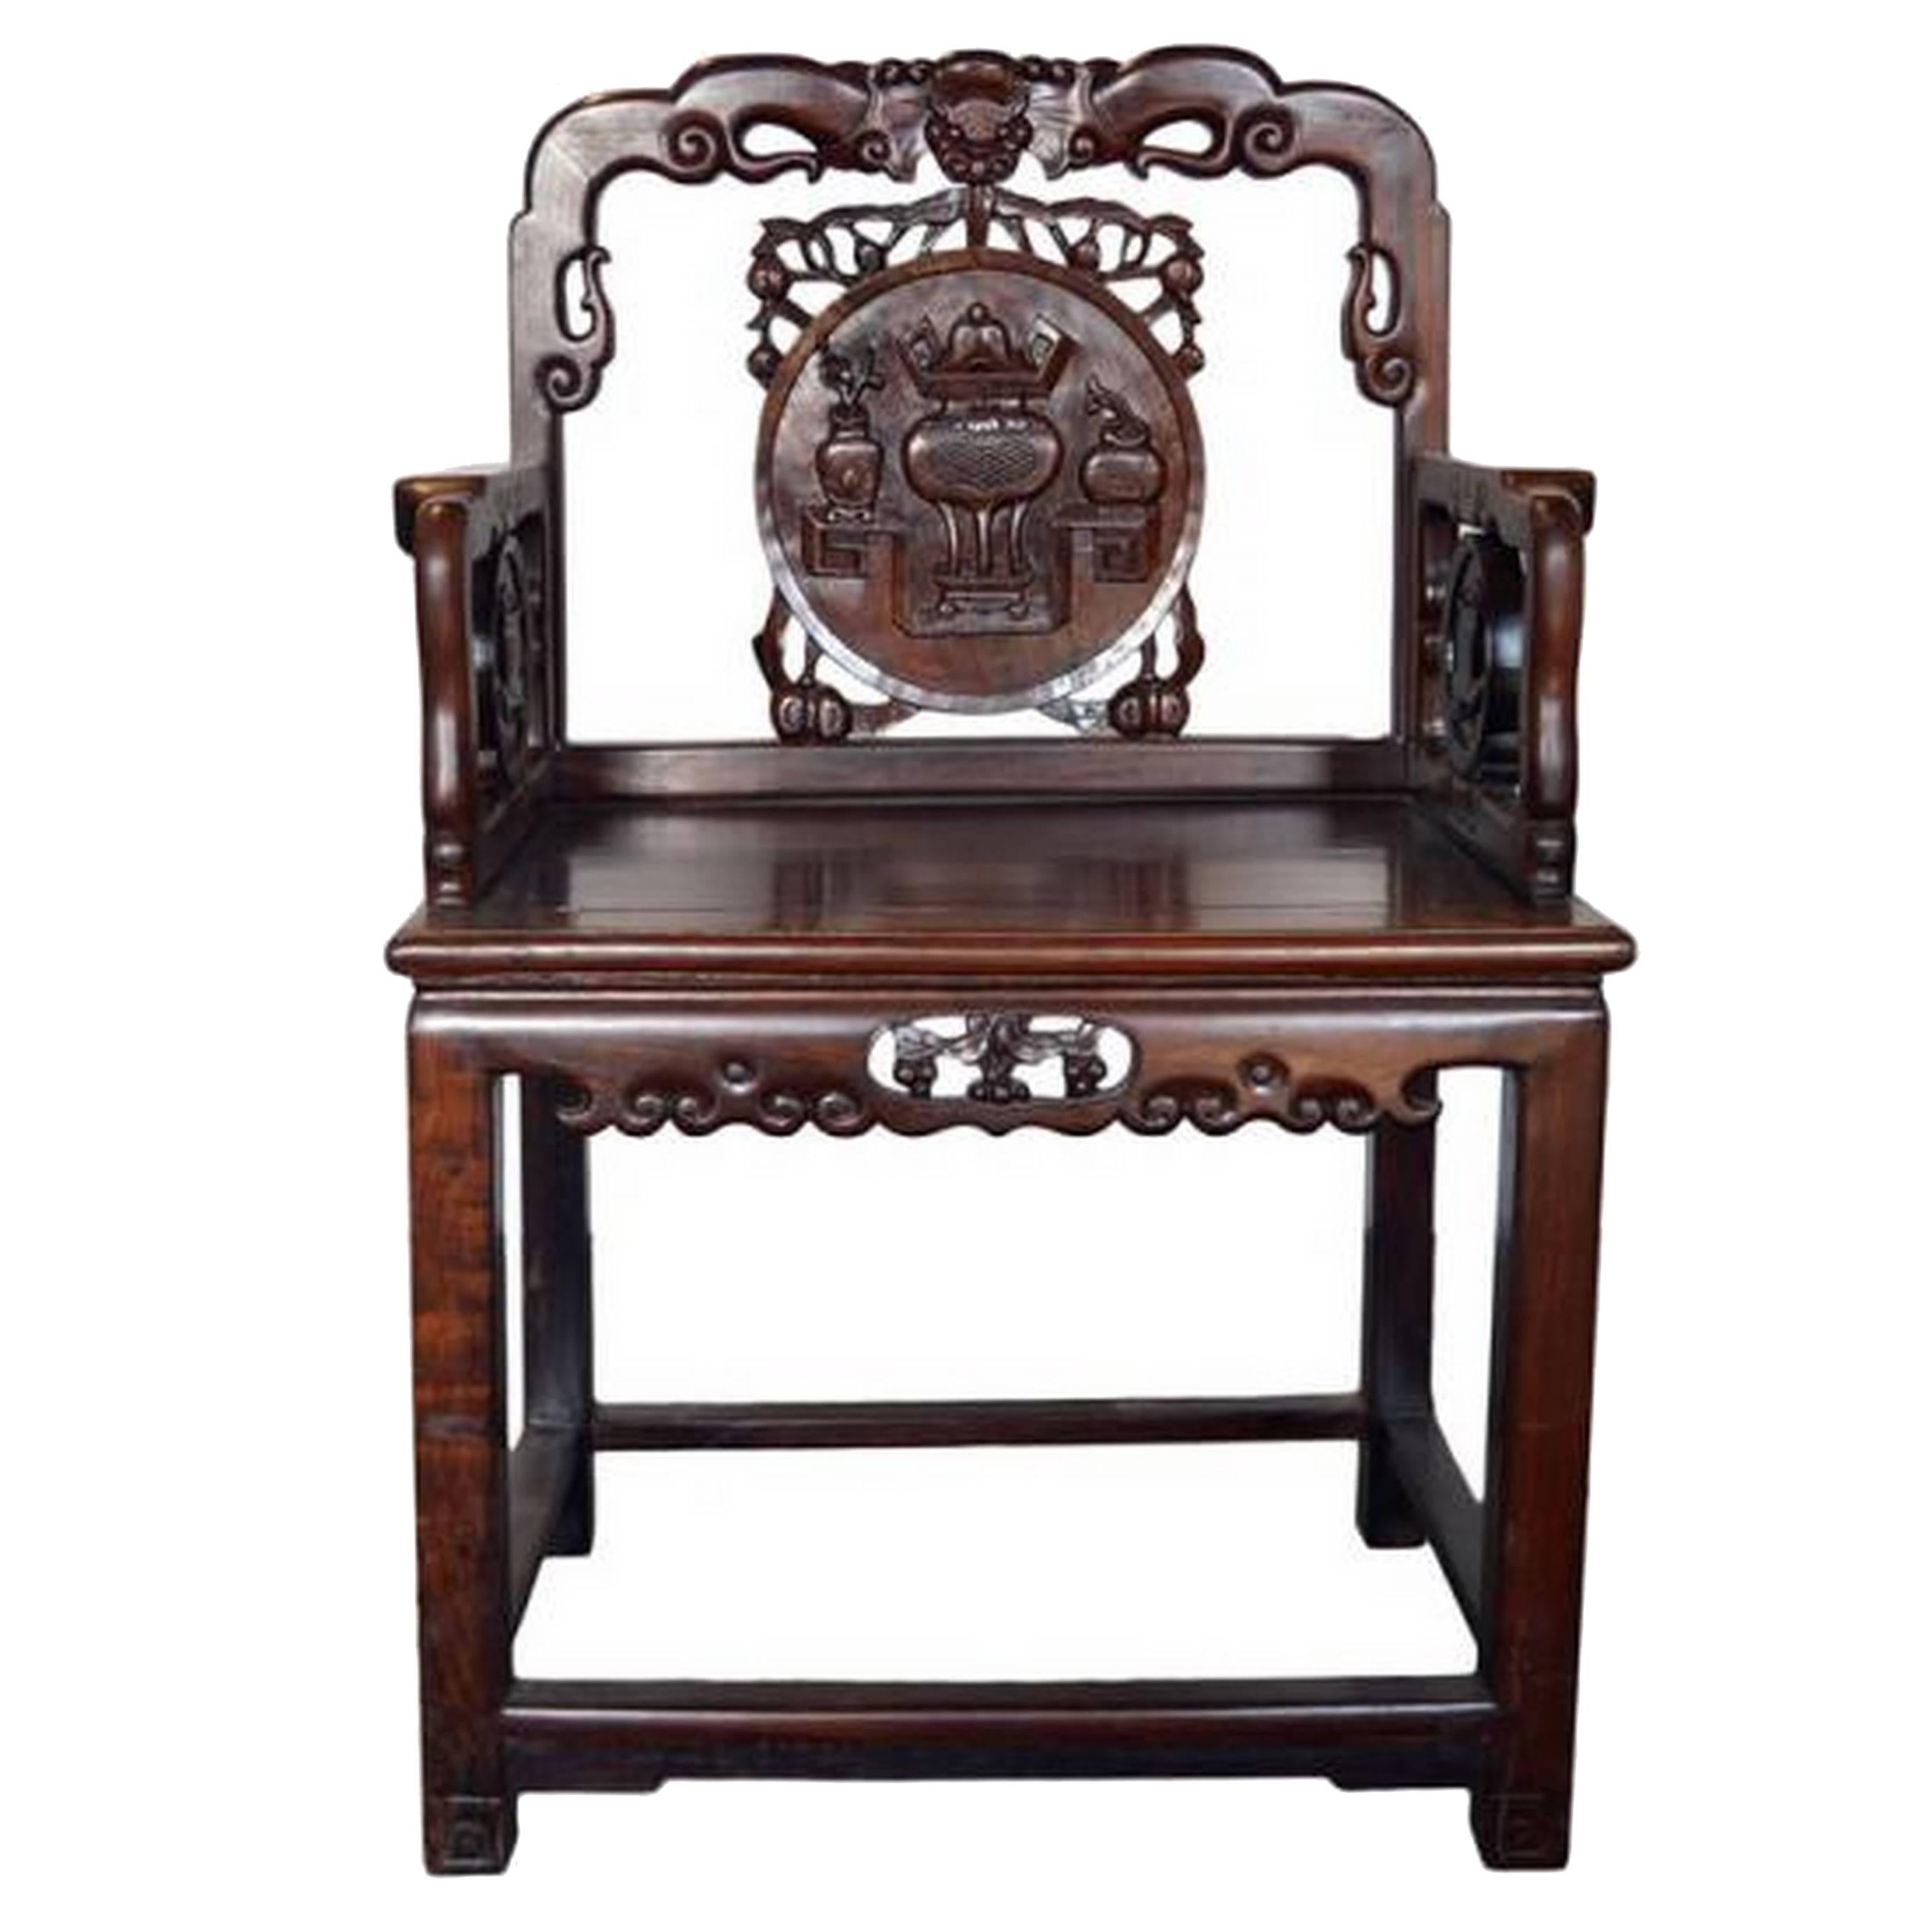 Unusual Antique Hand-Carved Chinese Chair